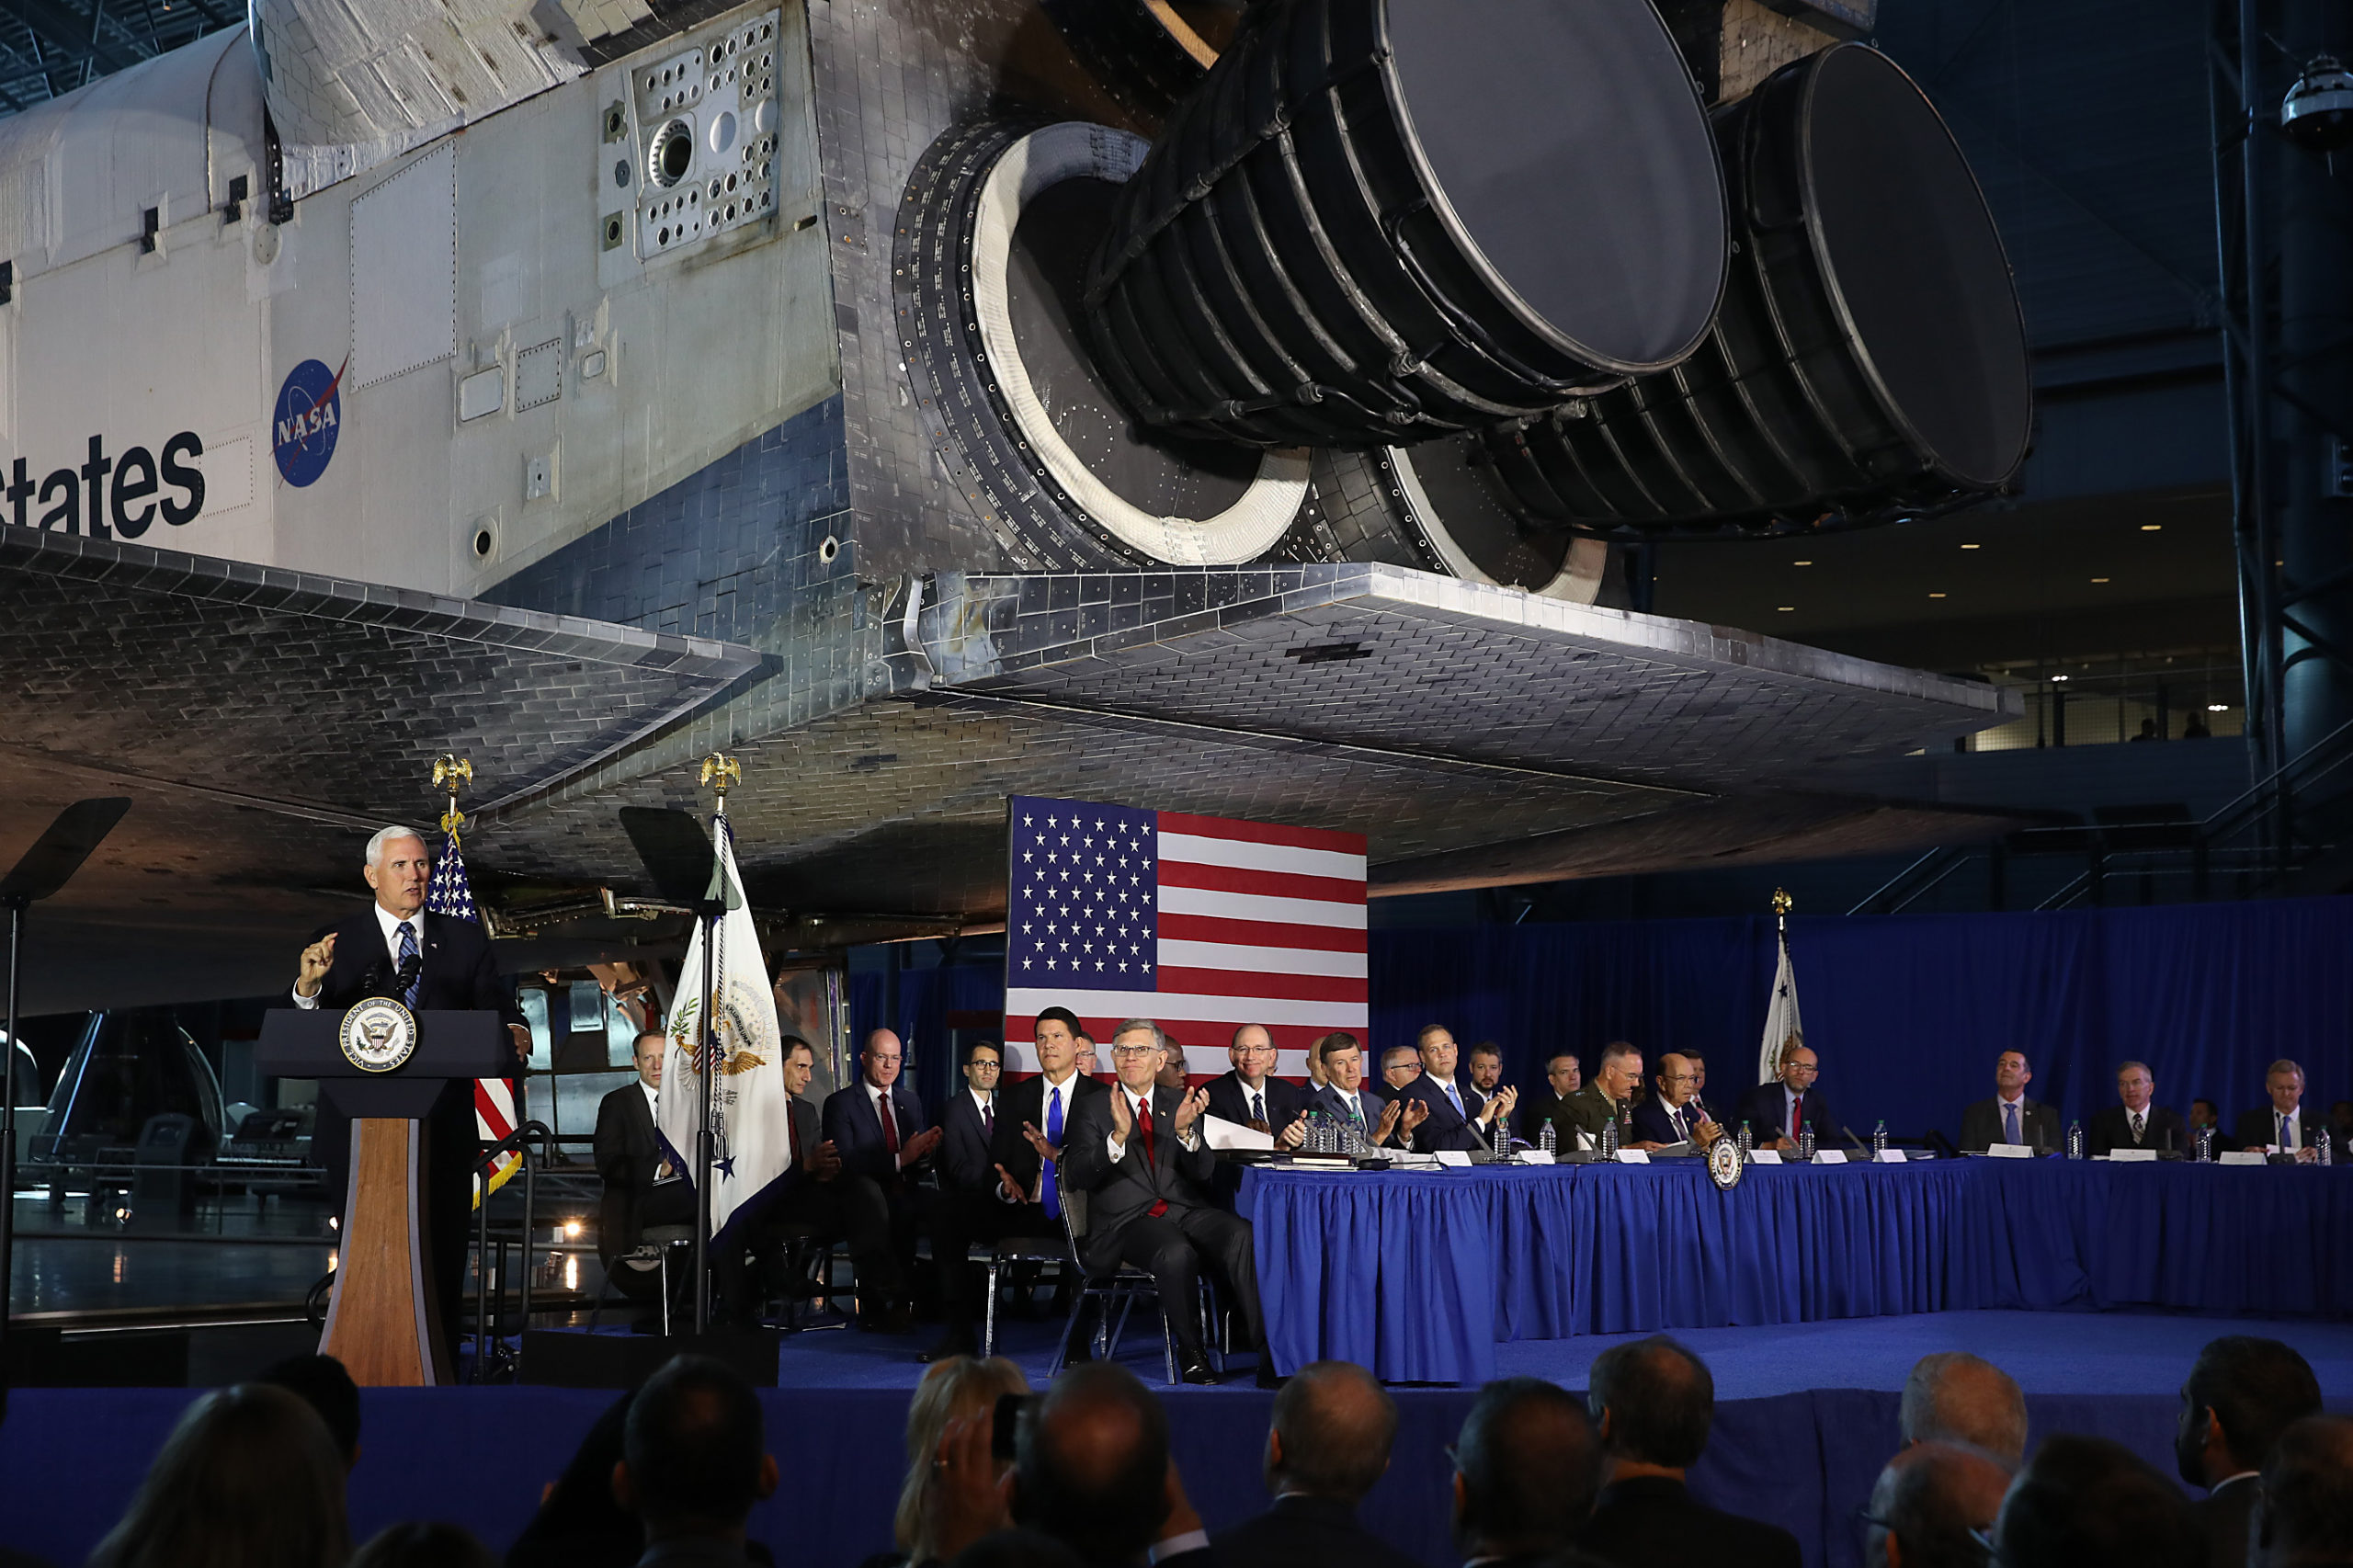 CHANTILLY, VIRGINIA - AUGUST 20: The Space Shuttle Discovery is the back drop as U.S. Vice President Mike Pence speaks during the 6th meeting of the National Space Council on "Leading the Next Frontier" at the National Air and Space Museum, Steven F. Udvar-Hazy Center, August 20, 2019 in Chantilly, Virginia. Originally established in 1958, this is the 6th meeting of the newly reestablished council in 20 years. (Photo by Mark Wilson/Getty Images)